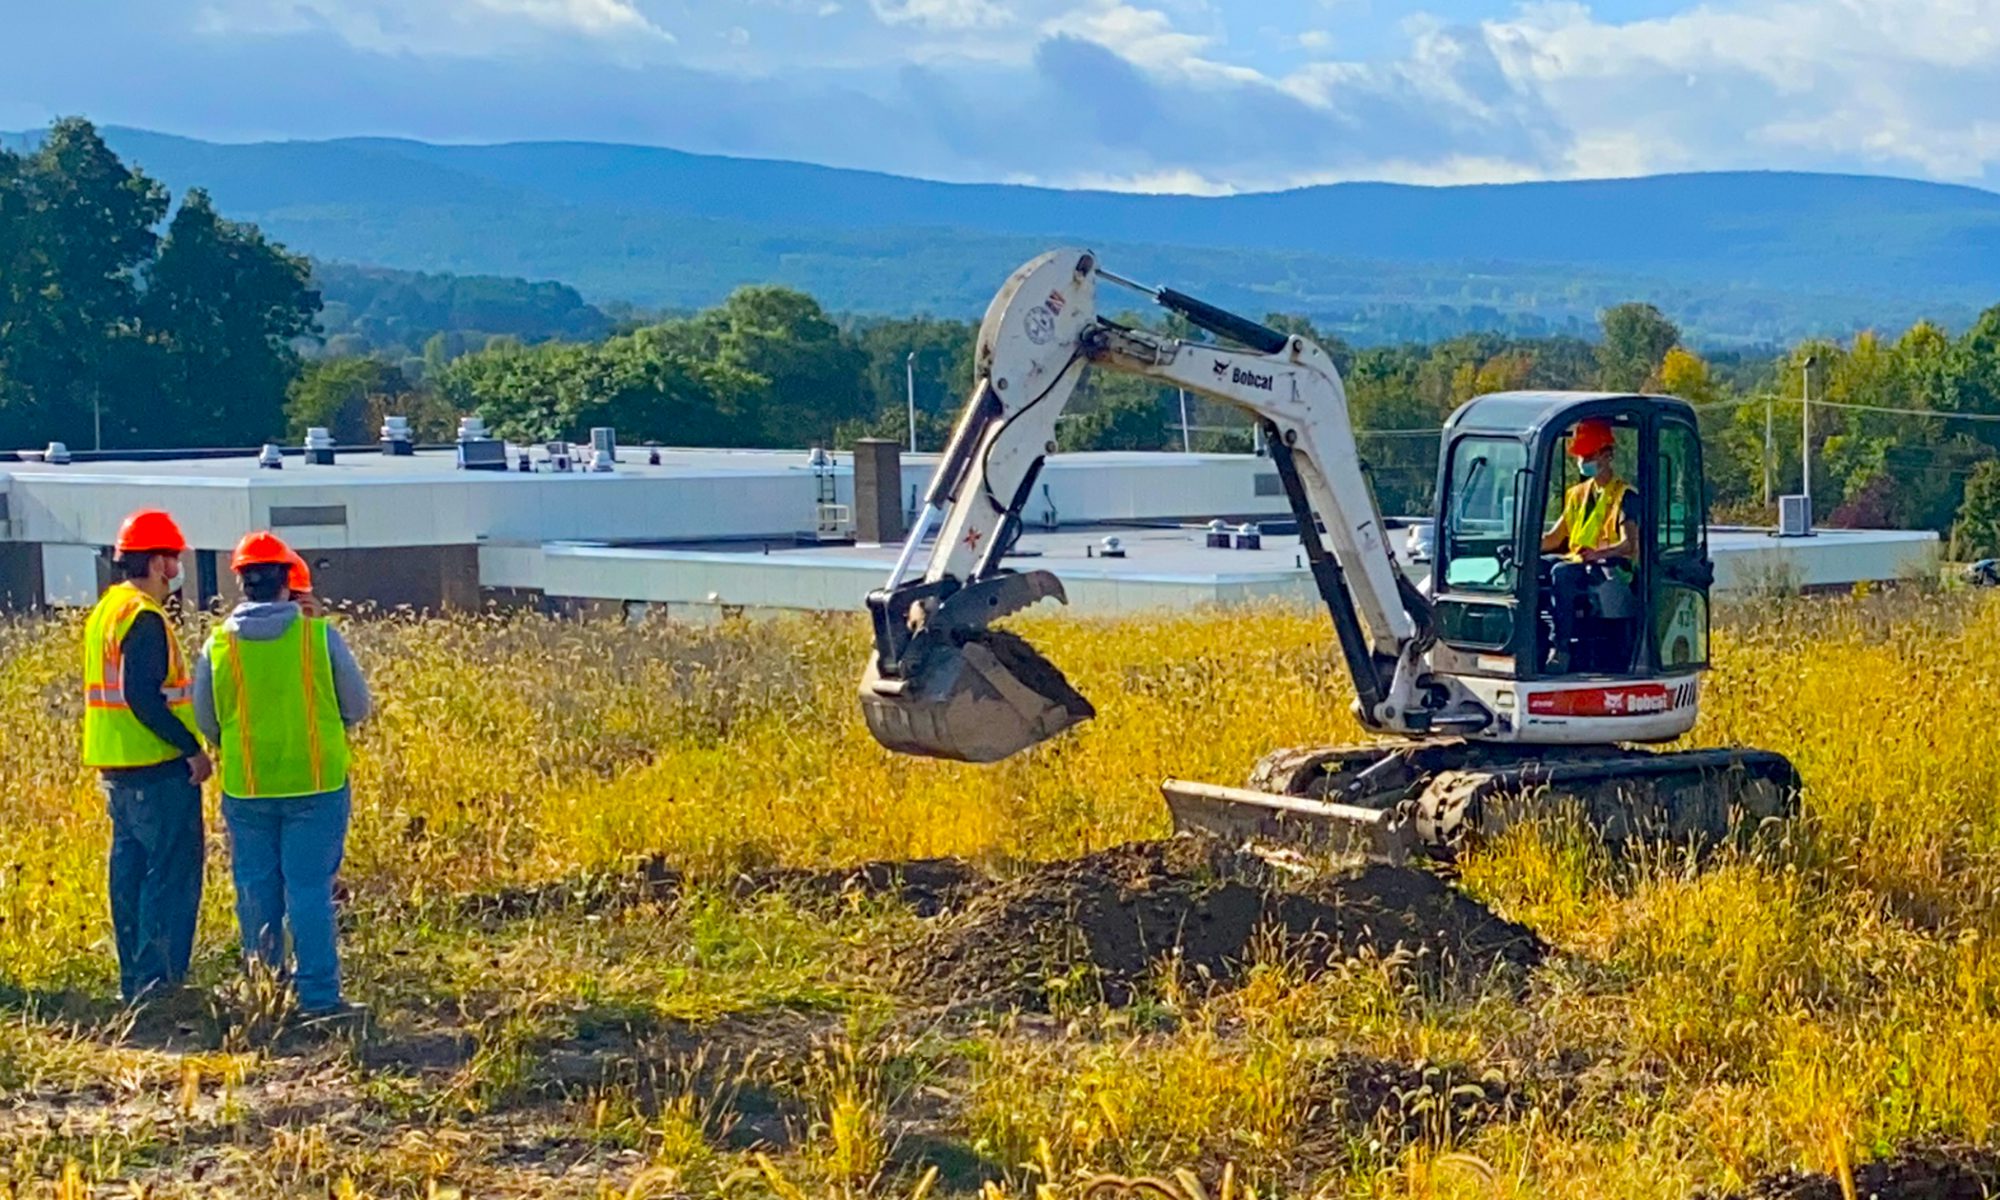 Two Heavy Equipment students, wearing bright yellow vests and orange hard hats, stand in a field of tall grass and watch a third student dig with an excavator. The roof of the Schoharie Career and Technical school and an expanse of mountains show in the distance.